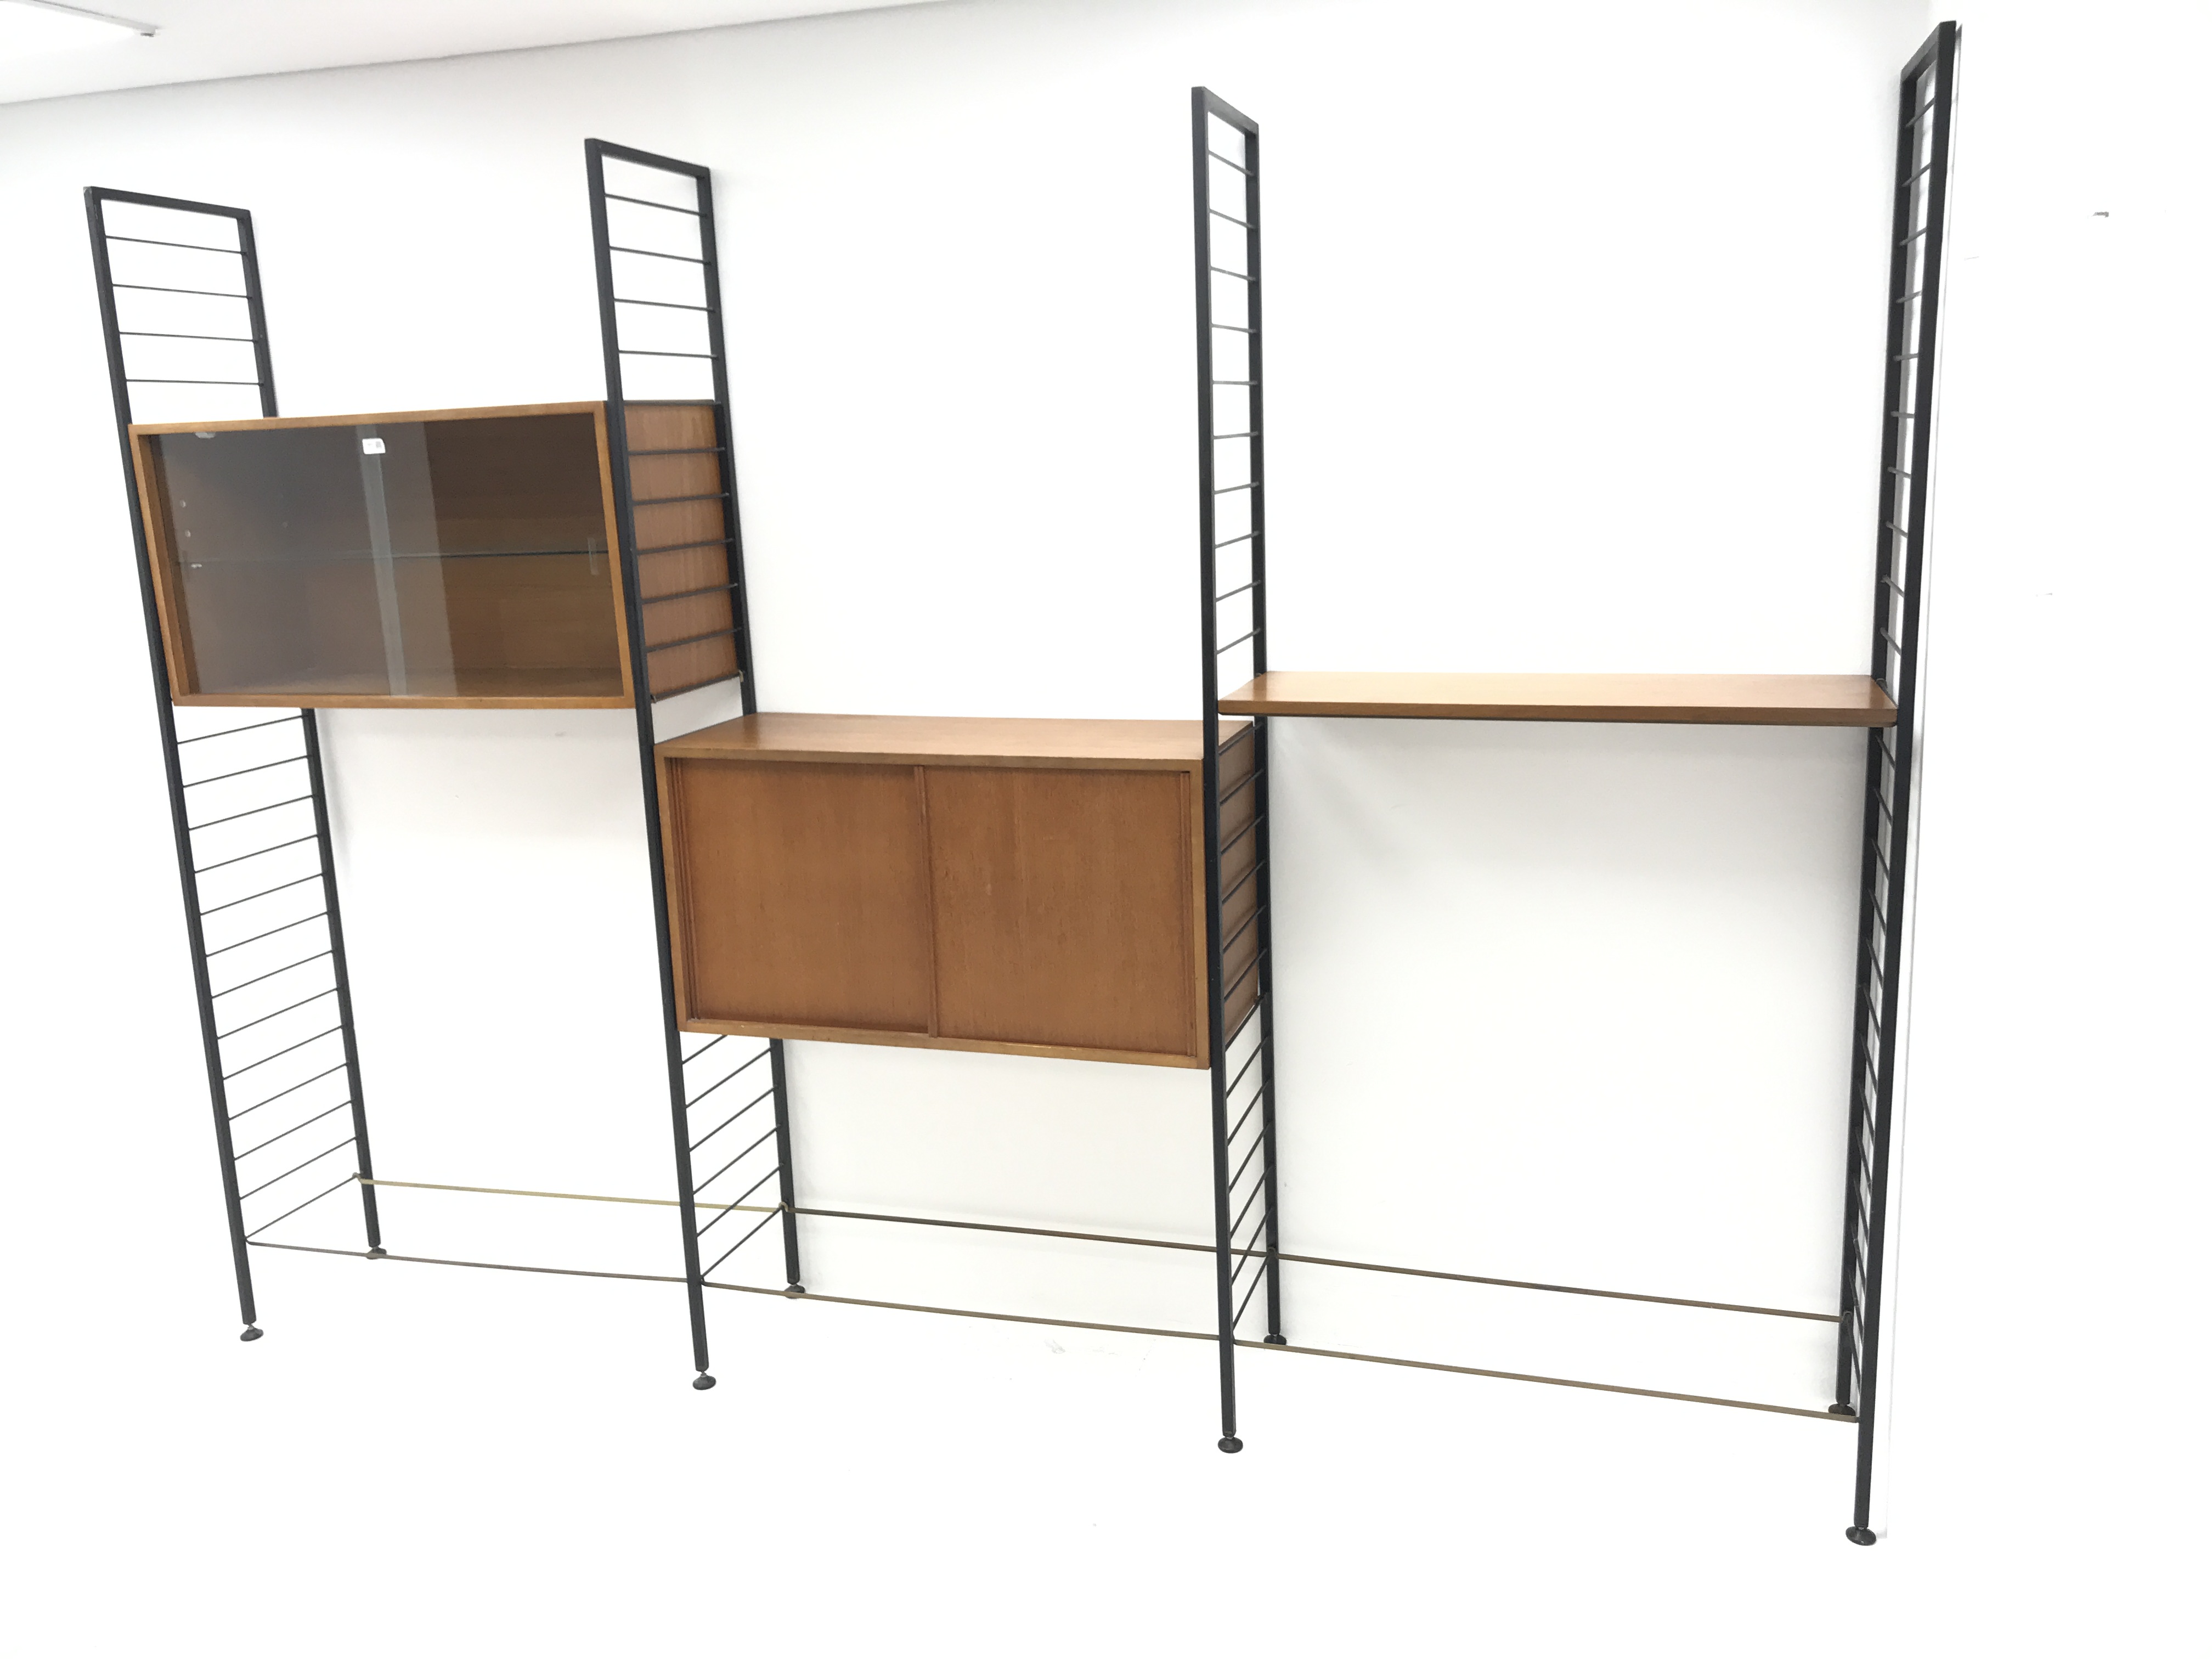 Staples Ladderax three bay sectional wall unit, two teak units comprising of solid and glazed slidin - Image 10 of 16